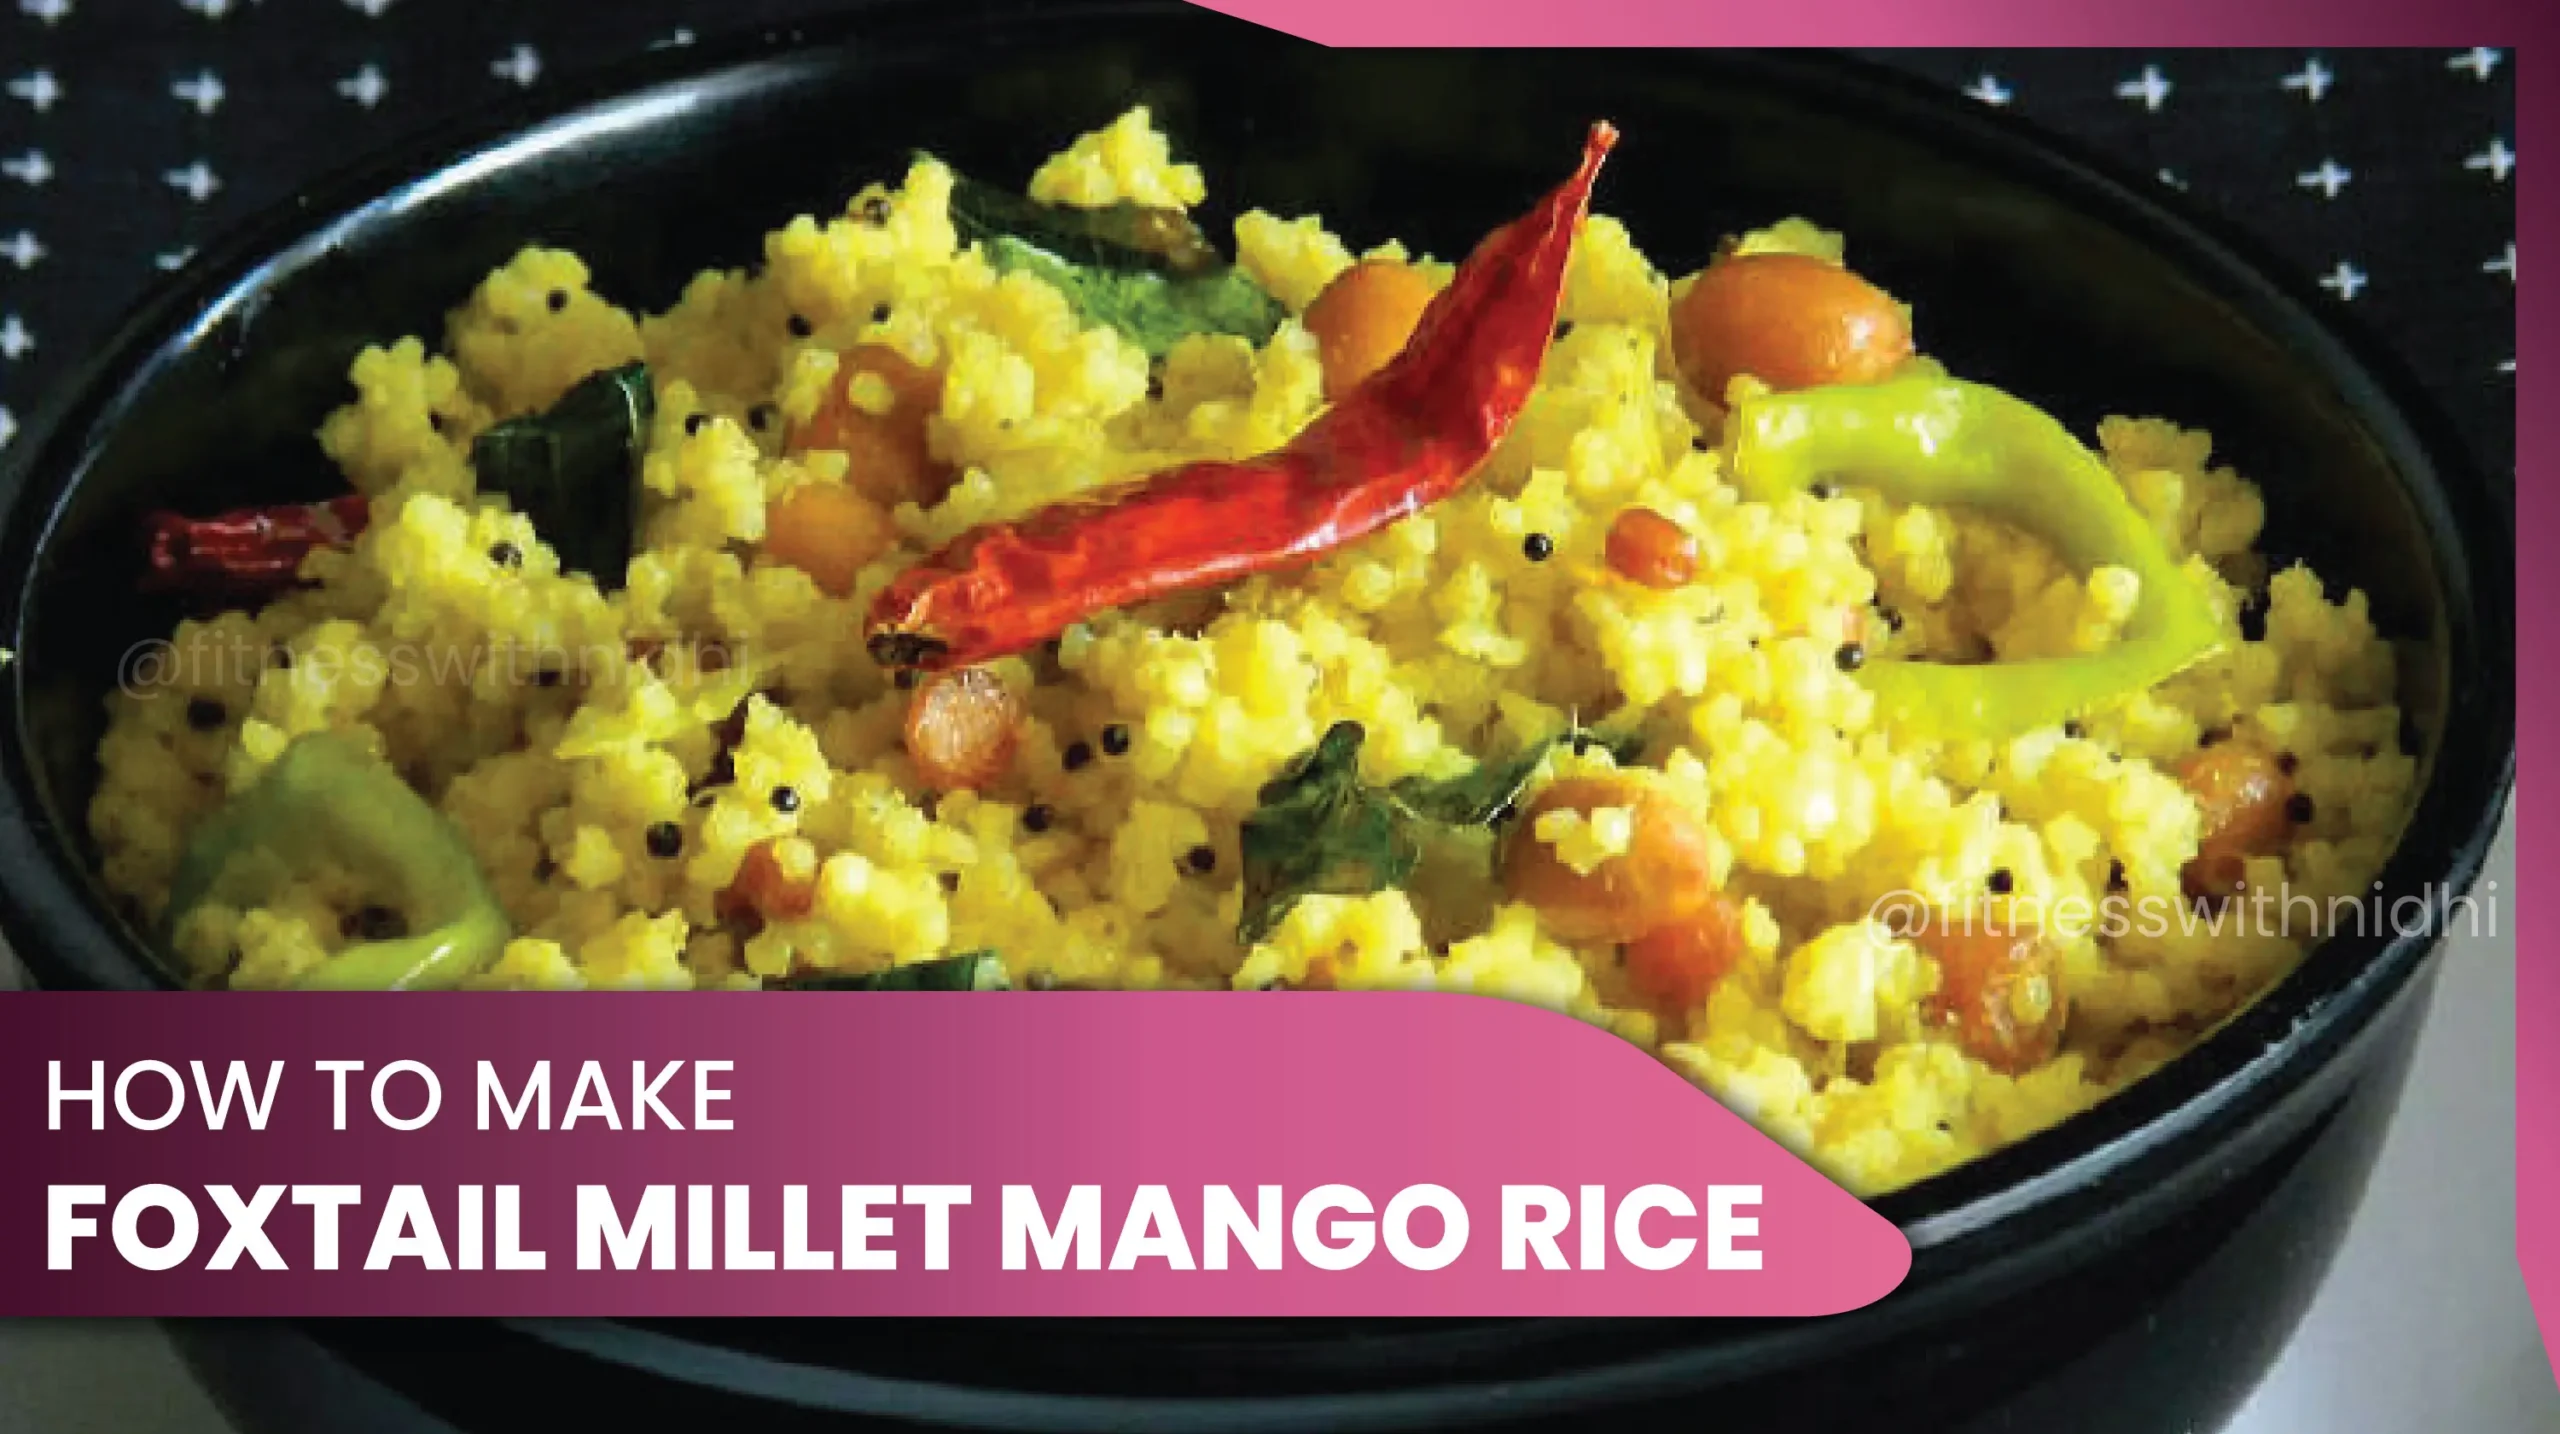 11how to make foxtail millet mango rice recipe